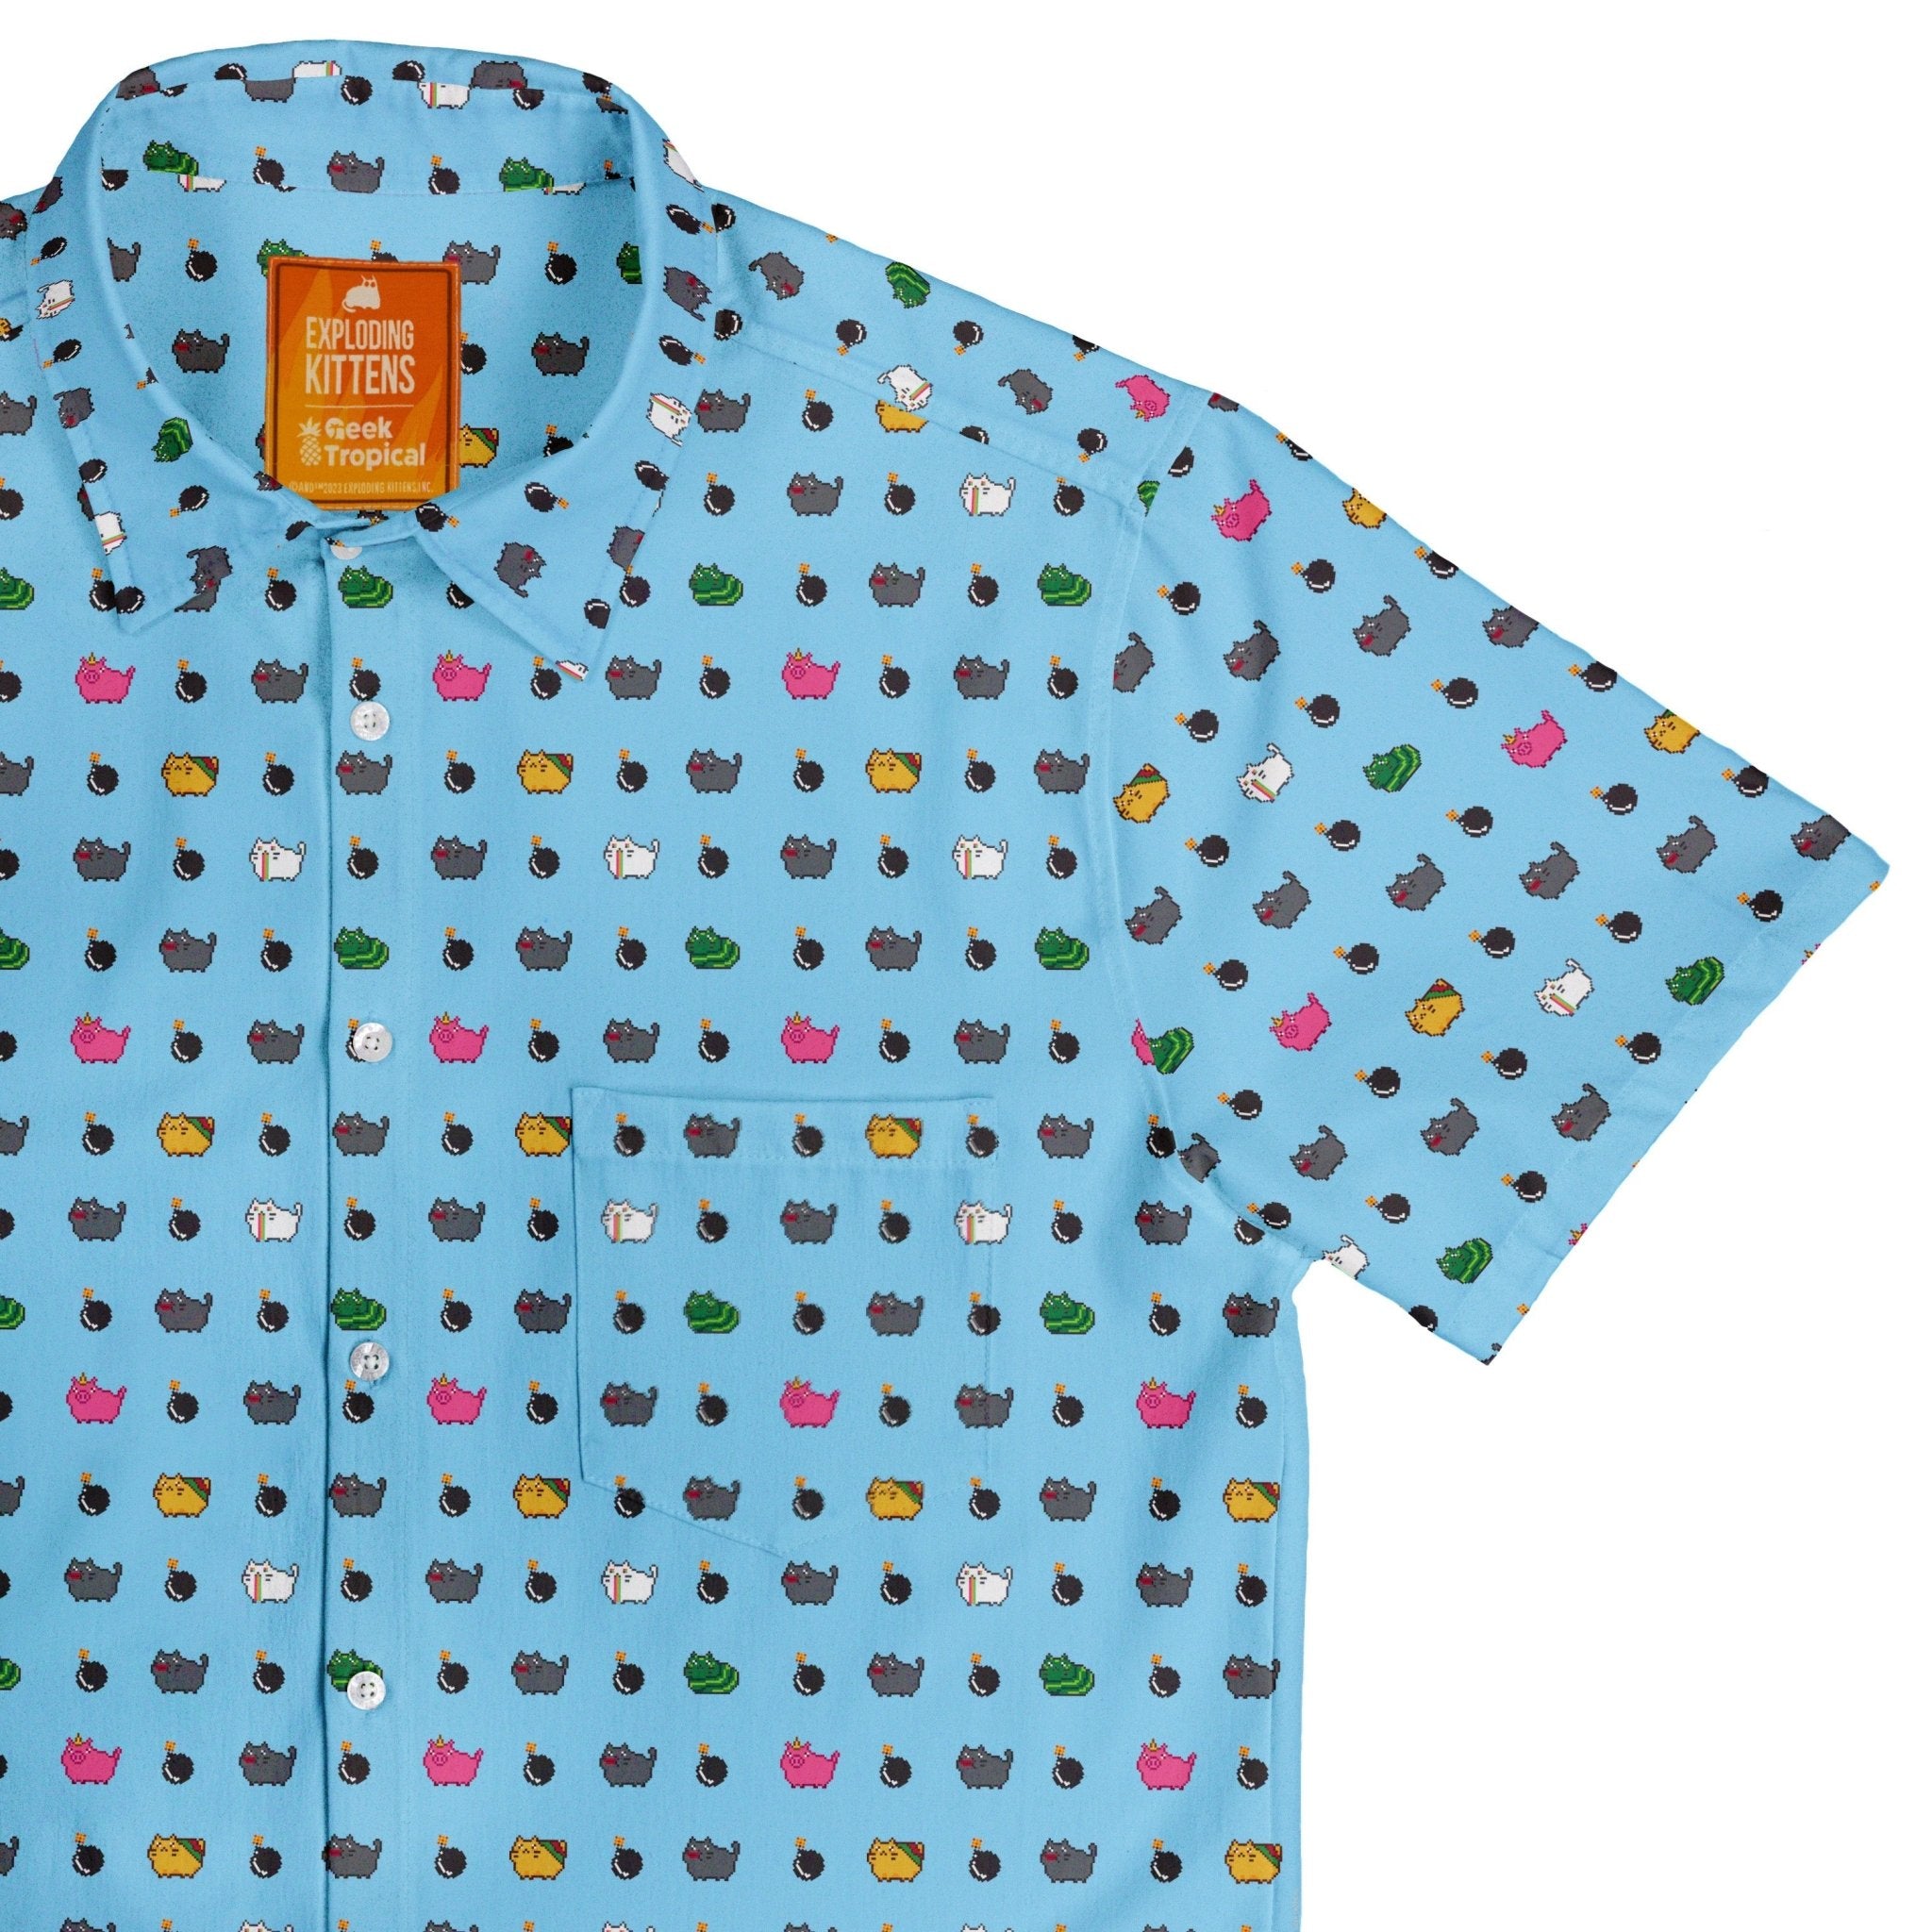 Exploding Kittens Pixel Cats Sky Blue Button Up Shirt - adult sizing - Animal Patterns - board game print